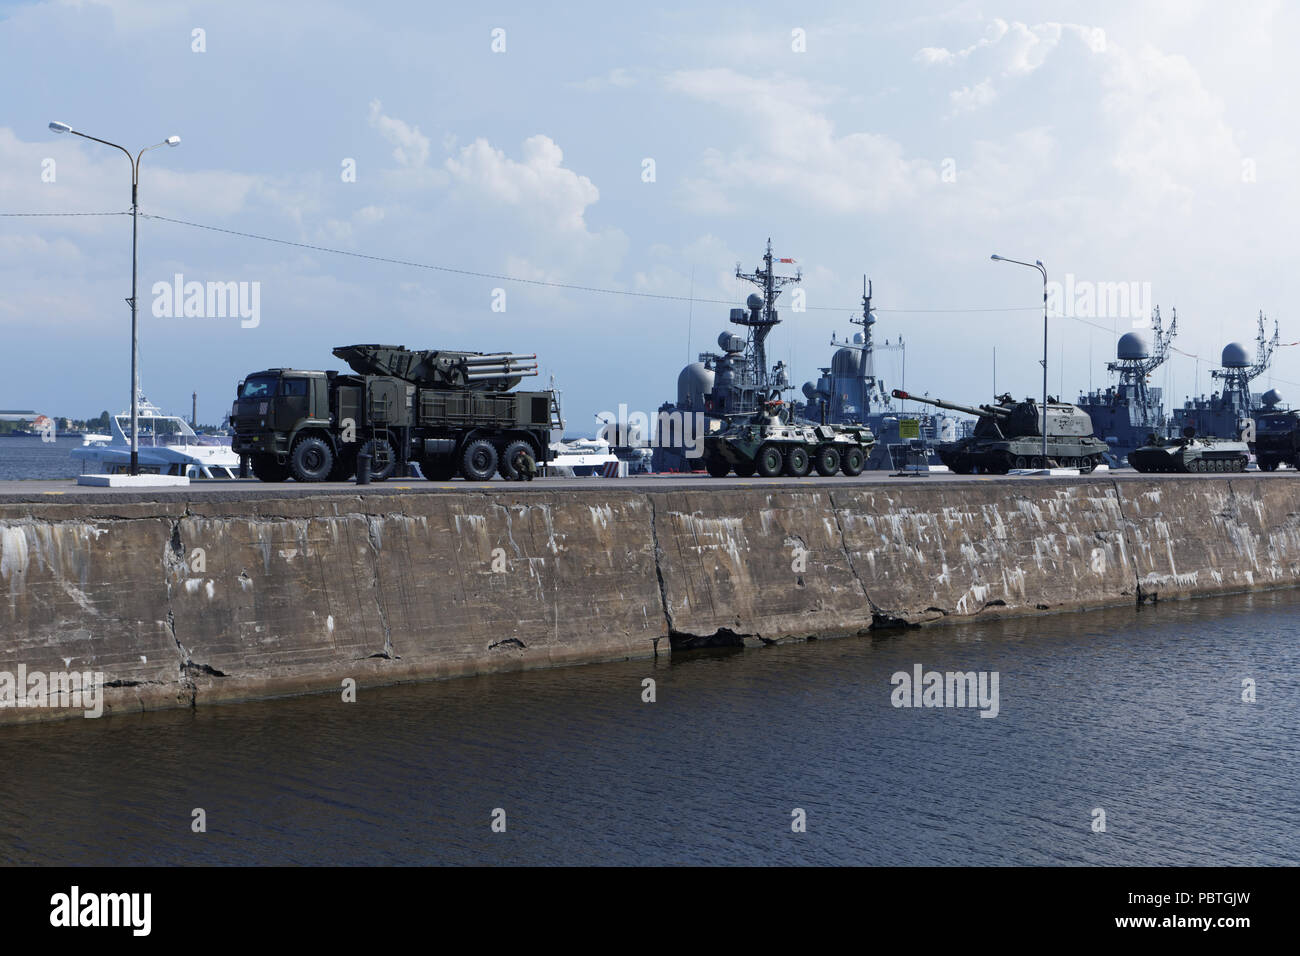 Kronstadt, St. Petersburg, Russia - July 28, 2018: Missile vehicle, armored carrier, artillery, and warships in Kronstadt before the Navy Day parade.  Stock Photo